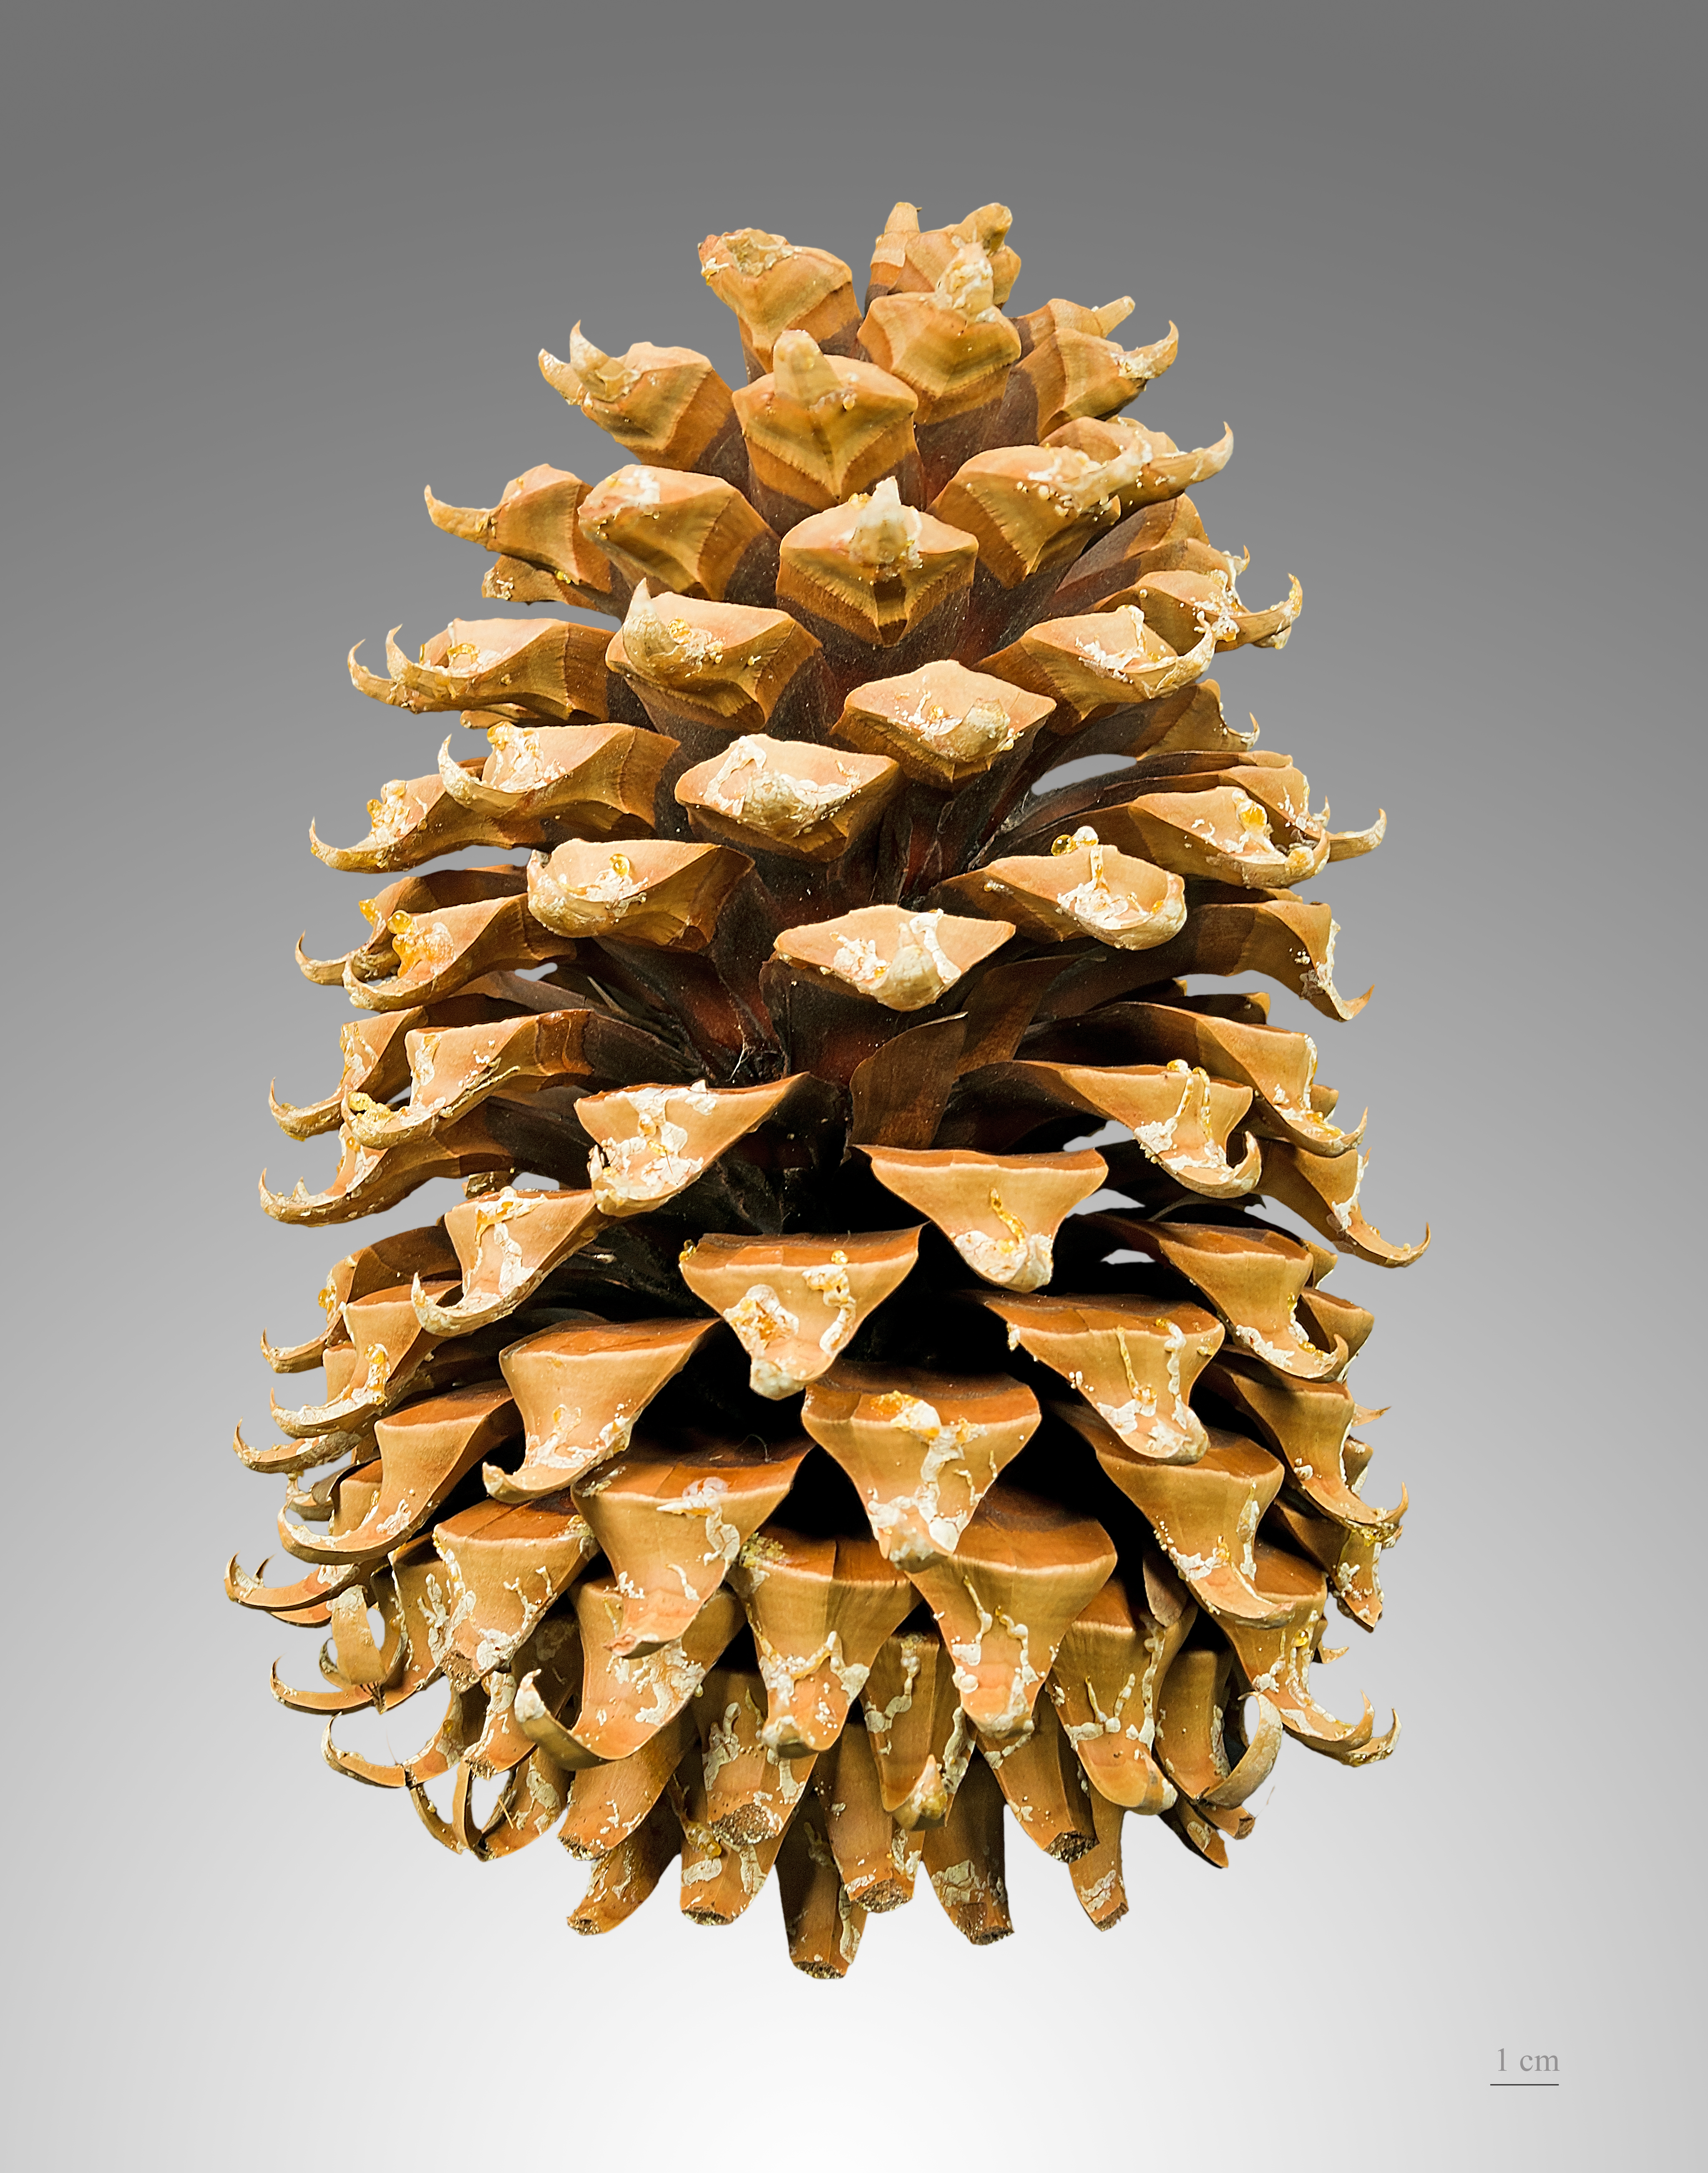 File:Pinus coulteri MHNT Cone.jpg - Wikimedia Commons